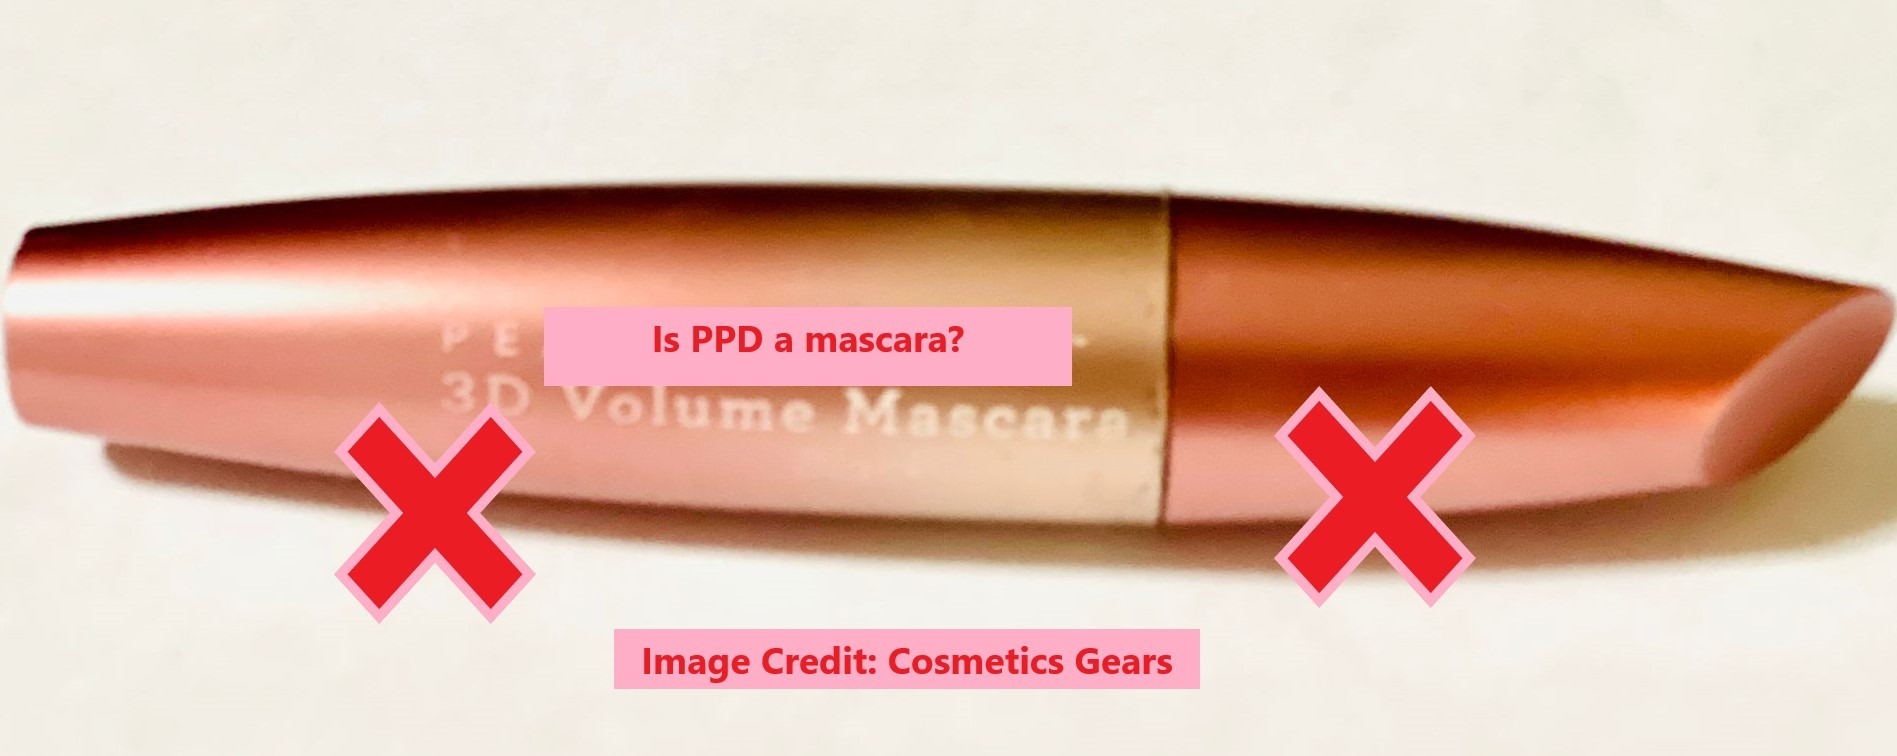 Is PPD a mascara